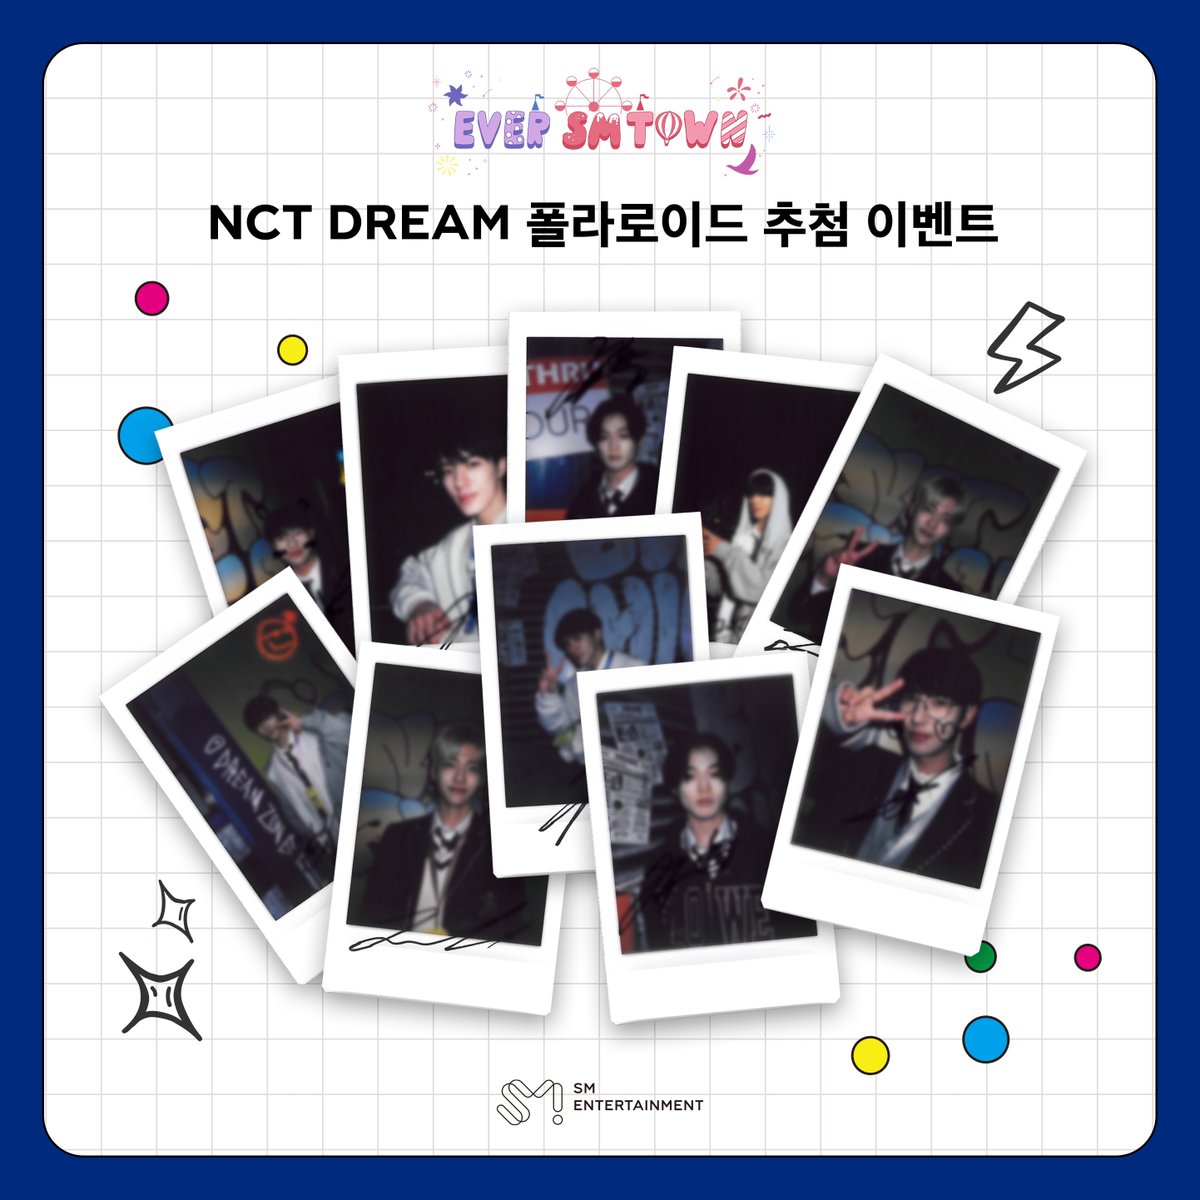 Image for [EVER SMTOWN Surprise Event] NCT DREAM Polaroid Lottery Event has been prepared. Take an authentication shot with a hurricane in the background and receive the one and only Polaroid photo with your autograph📸 Target: NCT AR PASS Purchaser Period: October 26 (Wed)~10 Monday 30th (Sun) Participation Venue: KWANGYA@EVERLAND Event Hours: 15:00-20:00 https://t.co/Ql7Vzityd2